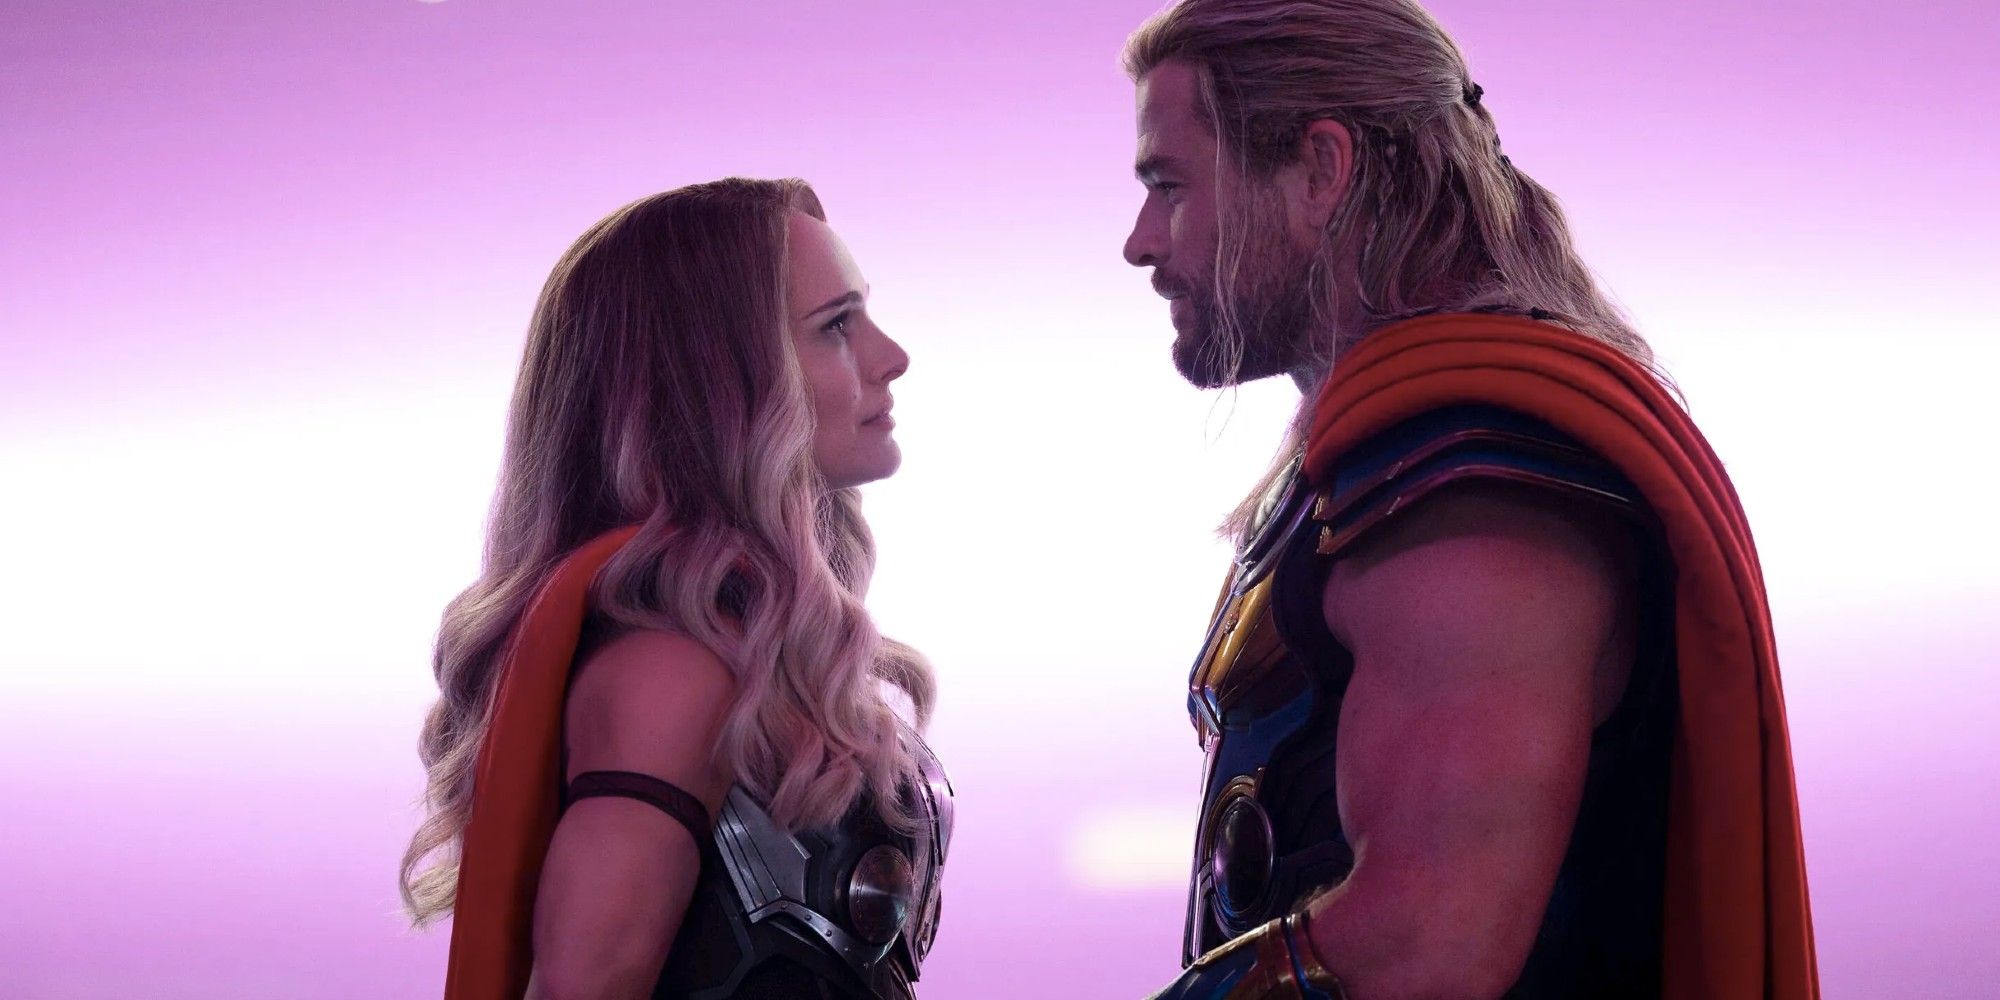 Natalie Portman and Chris Hemsworth in 'Thor - Love and Thunder'